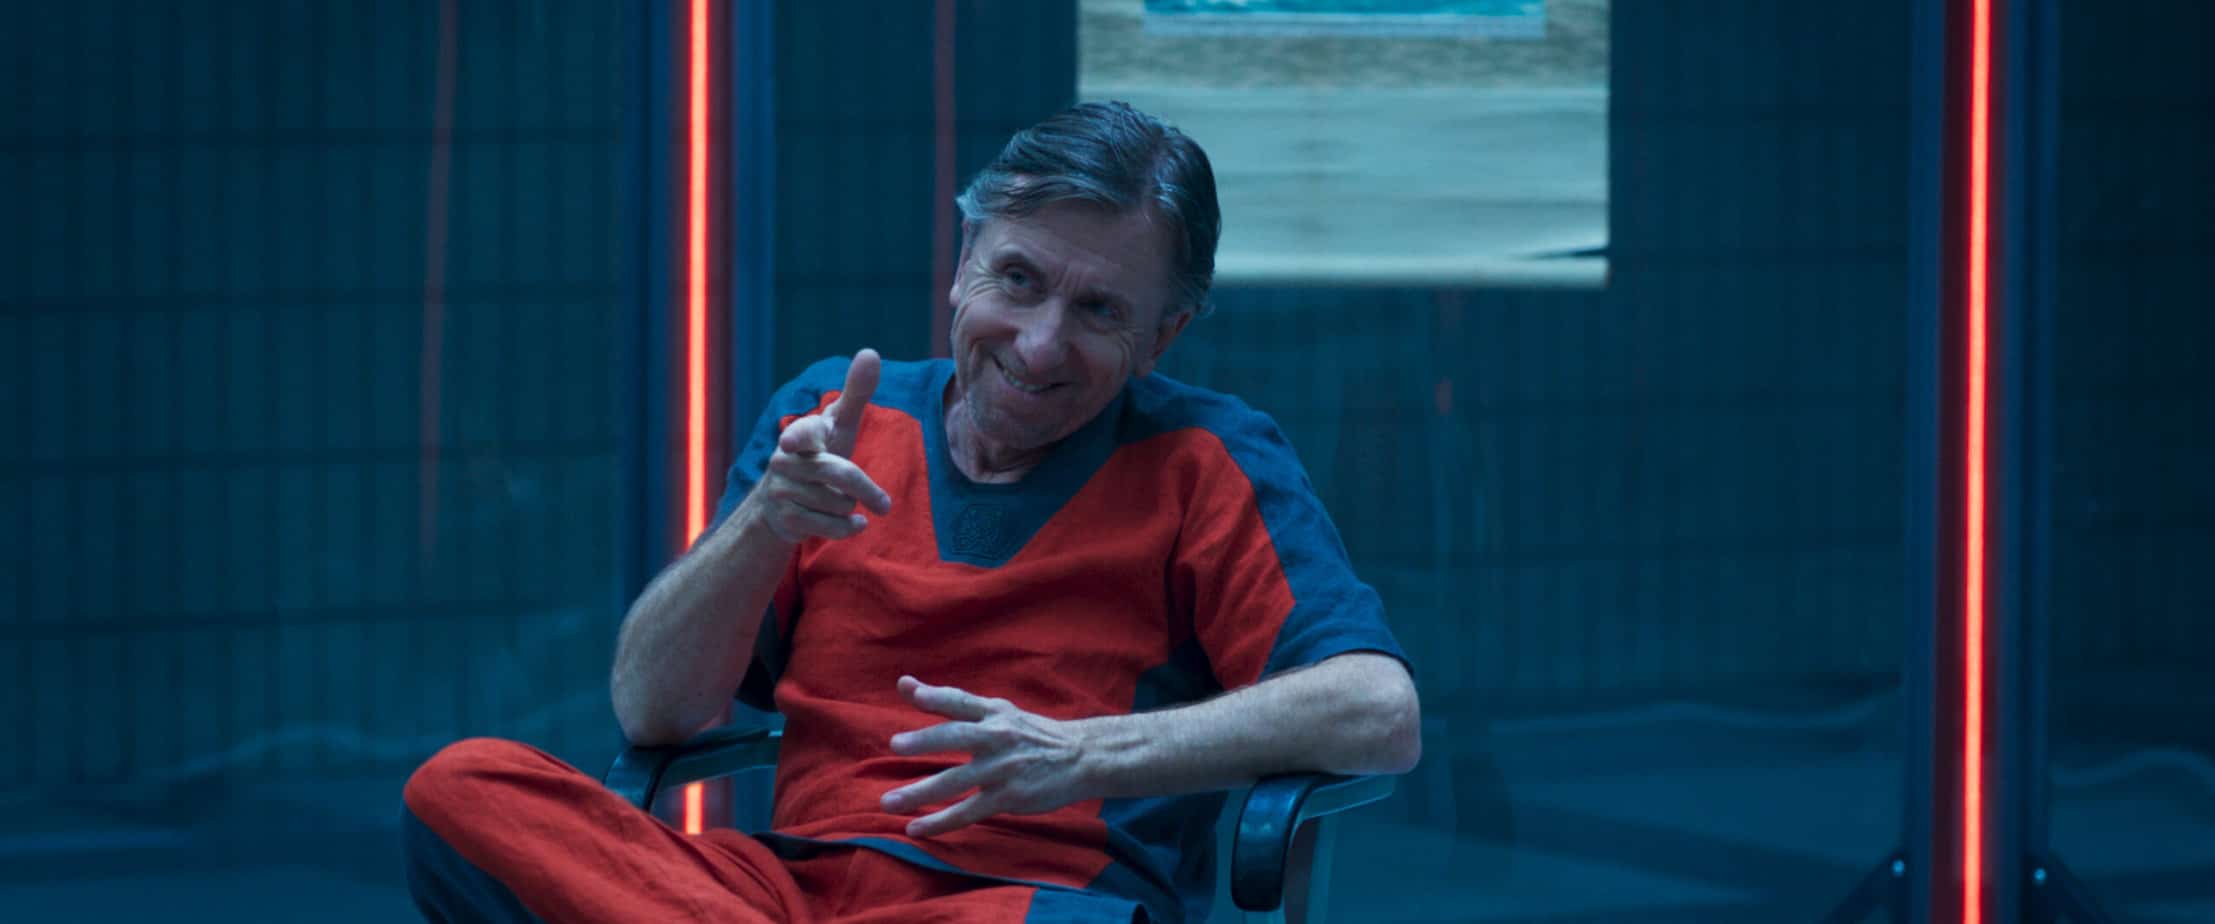 Old man in orange t-shirt and pants doing finger guns to someone off-screen. 